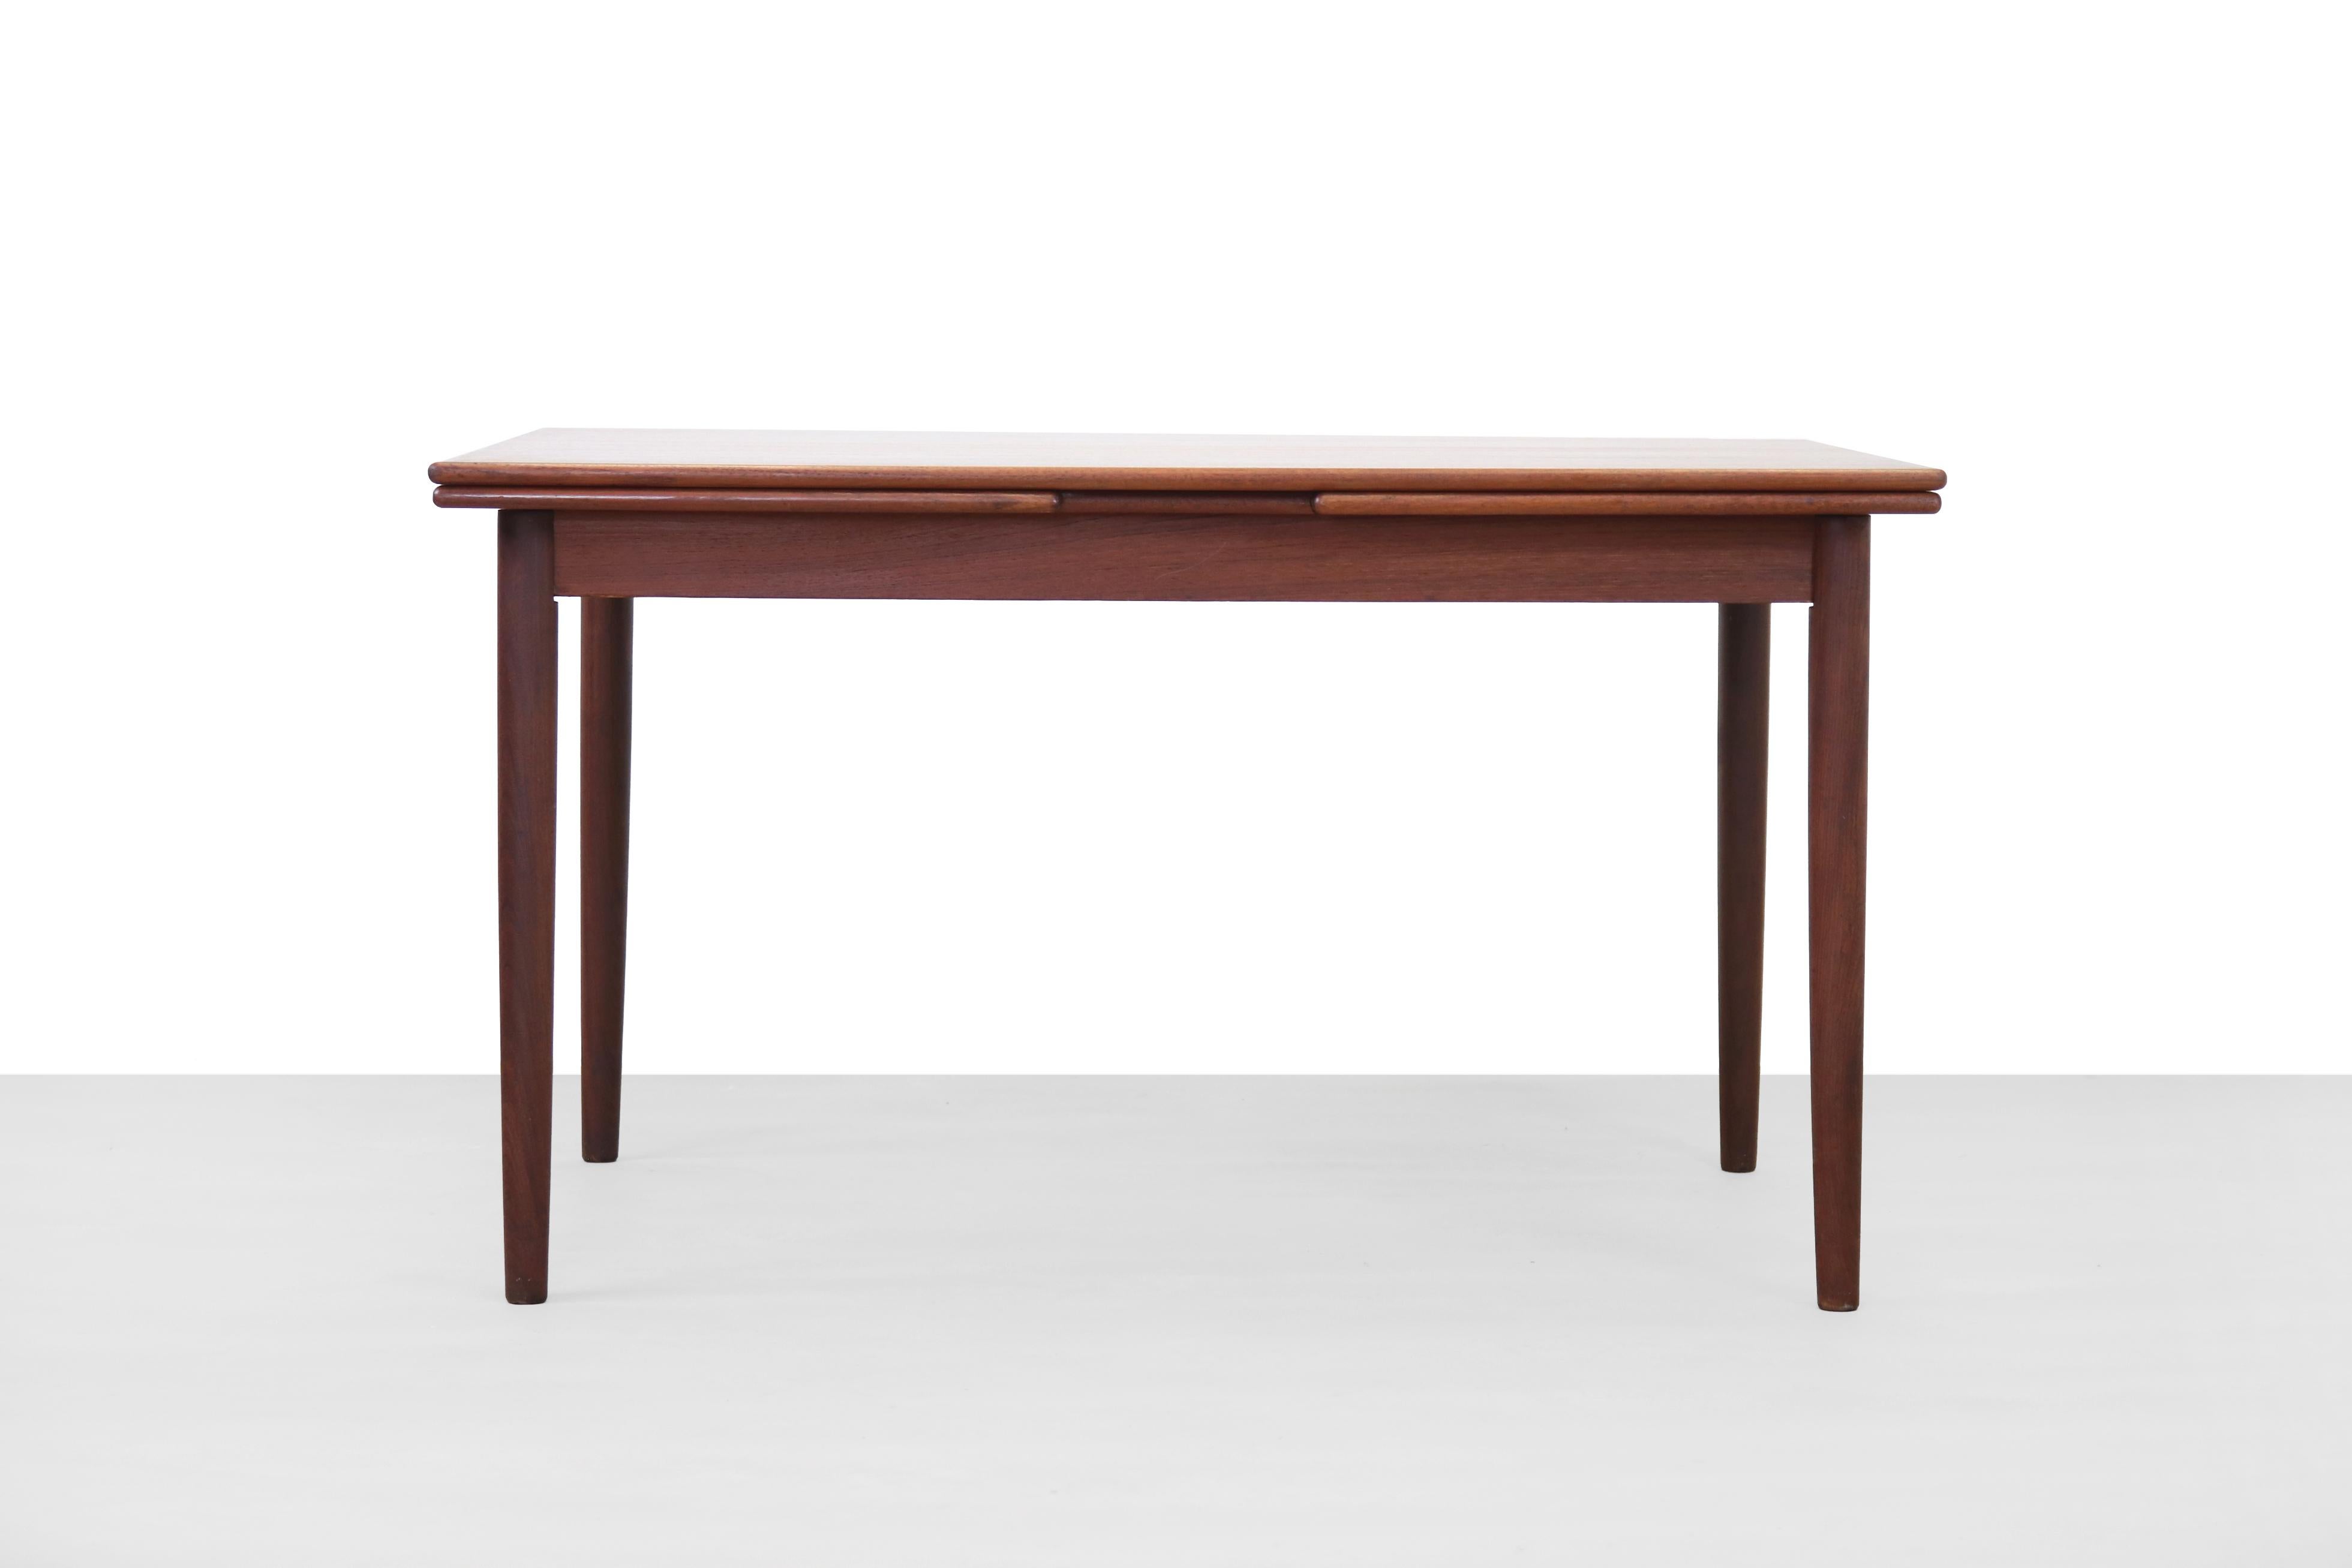 Vintage Danish extendable dining table made of teak. The extra blades are nicely integrated in the design, stored under the blade. The table tops are nicely rounded with solid teak wood edges. This table is 130 cm long, 86 cm deep and 75 cm high.